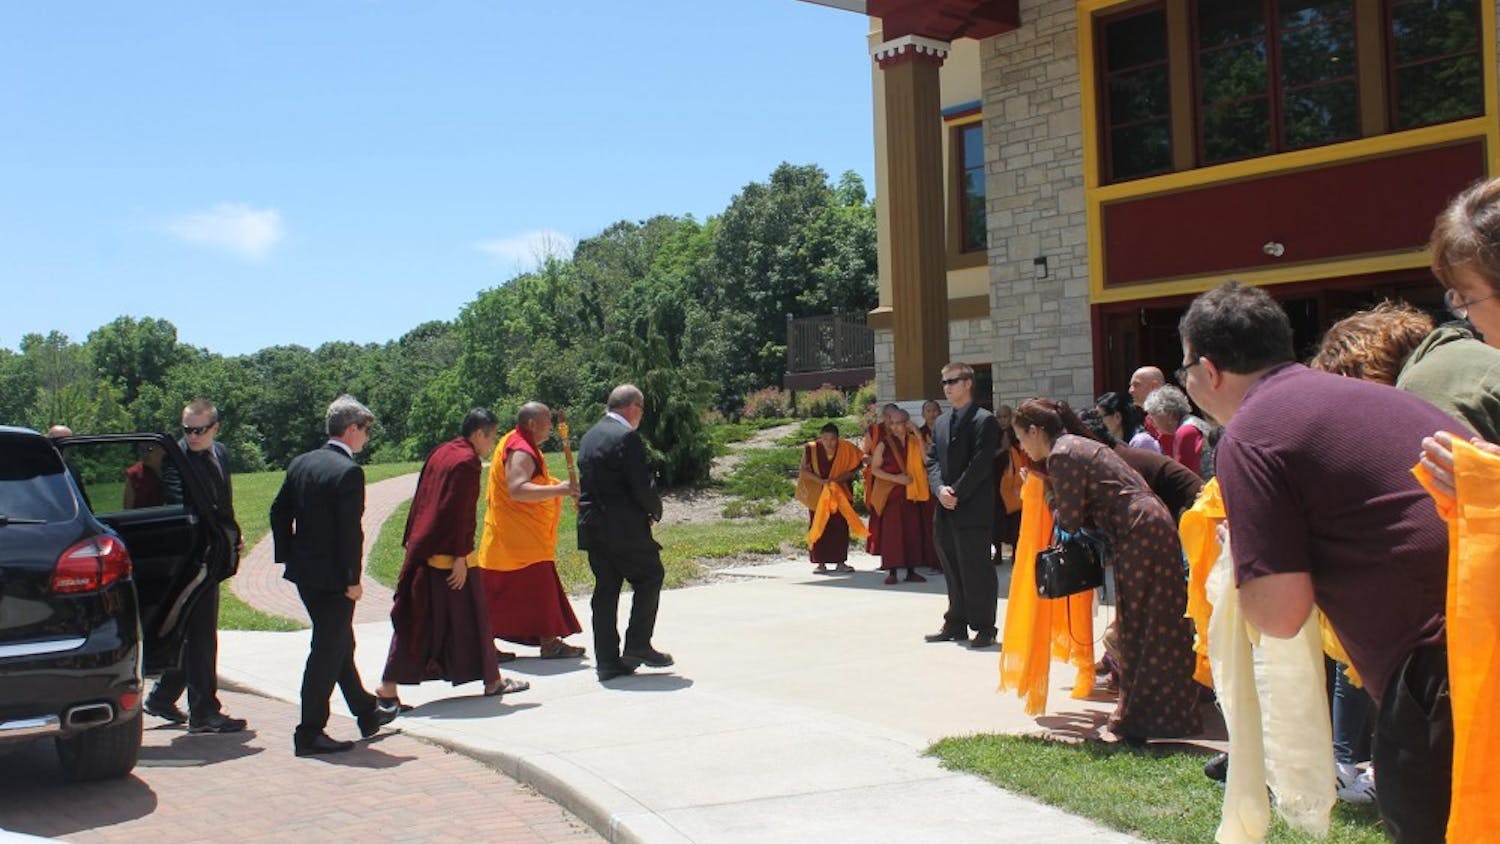 Buddhism students hold Khata to welcome the visit of Kyabje Trijang Chocktrul Rinpoche in front of Gaden Khachoe Shing Monastery.